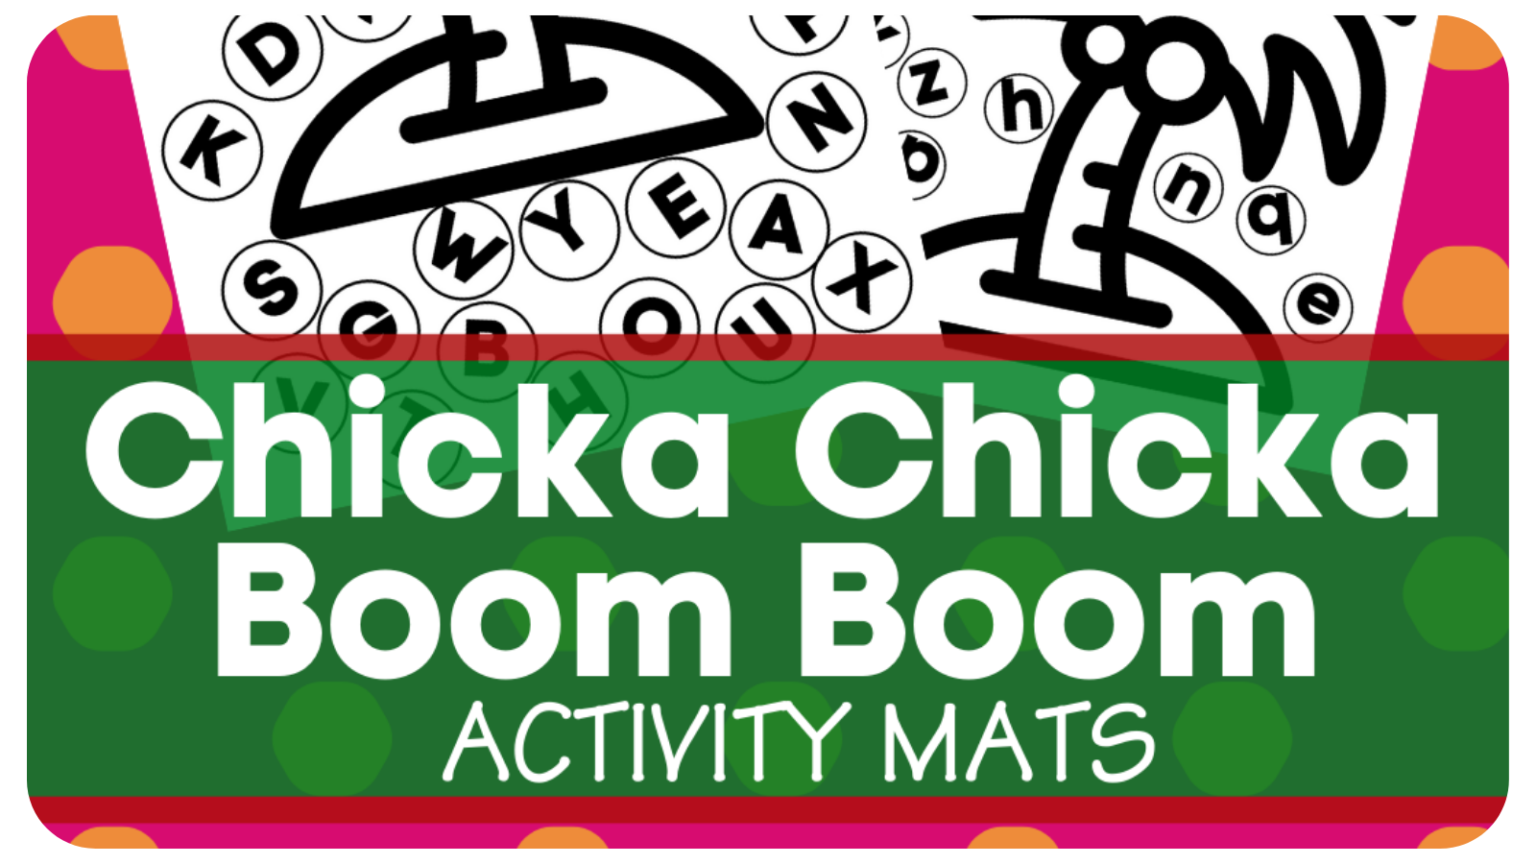 Chicka Chicka Boom Boom Printables • Yogalore And More Activities with ...